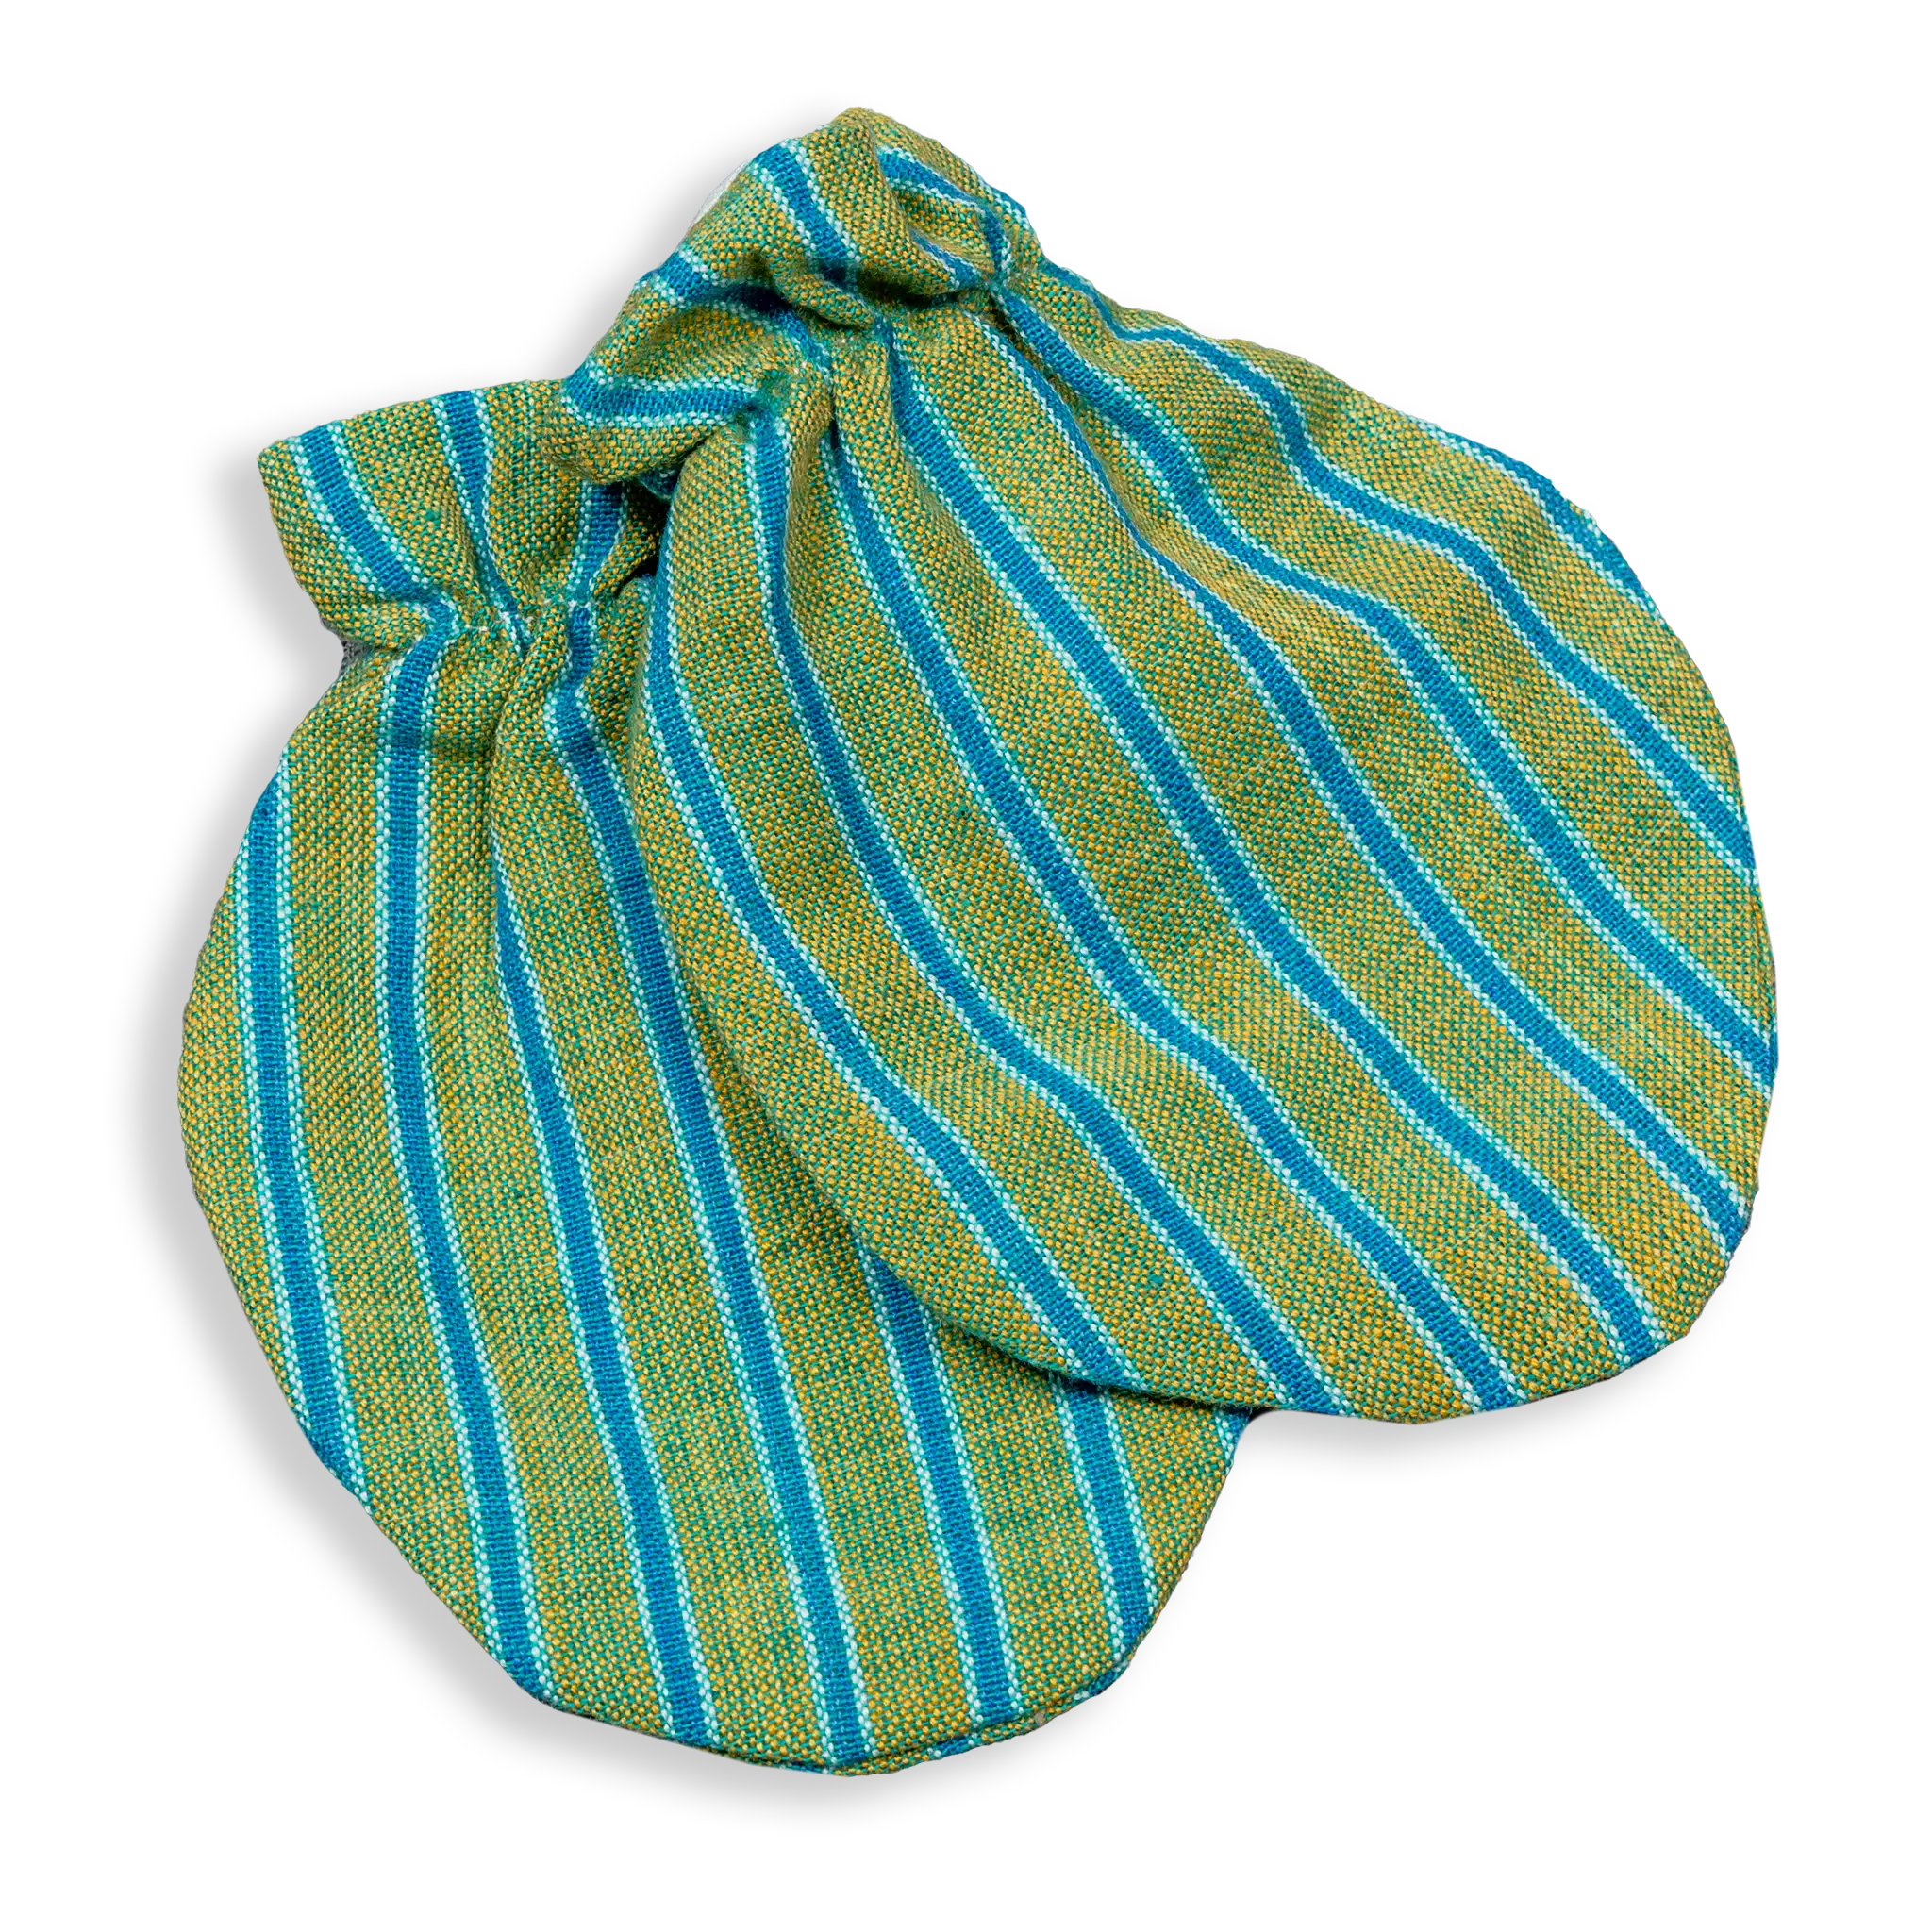 Kokroma Anti-Scratch Mittens are available with colourful patterns made with 100% soft cotton. Recommended for infants 0-6 months old.